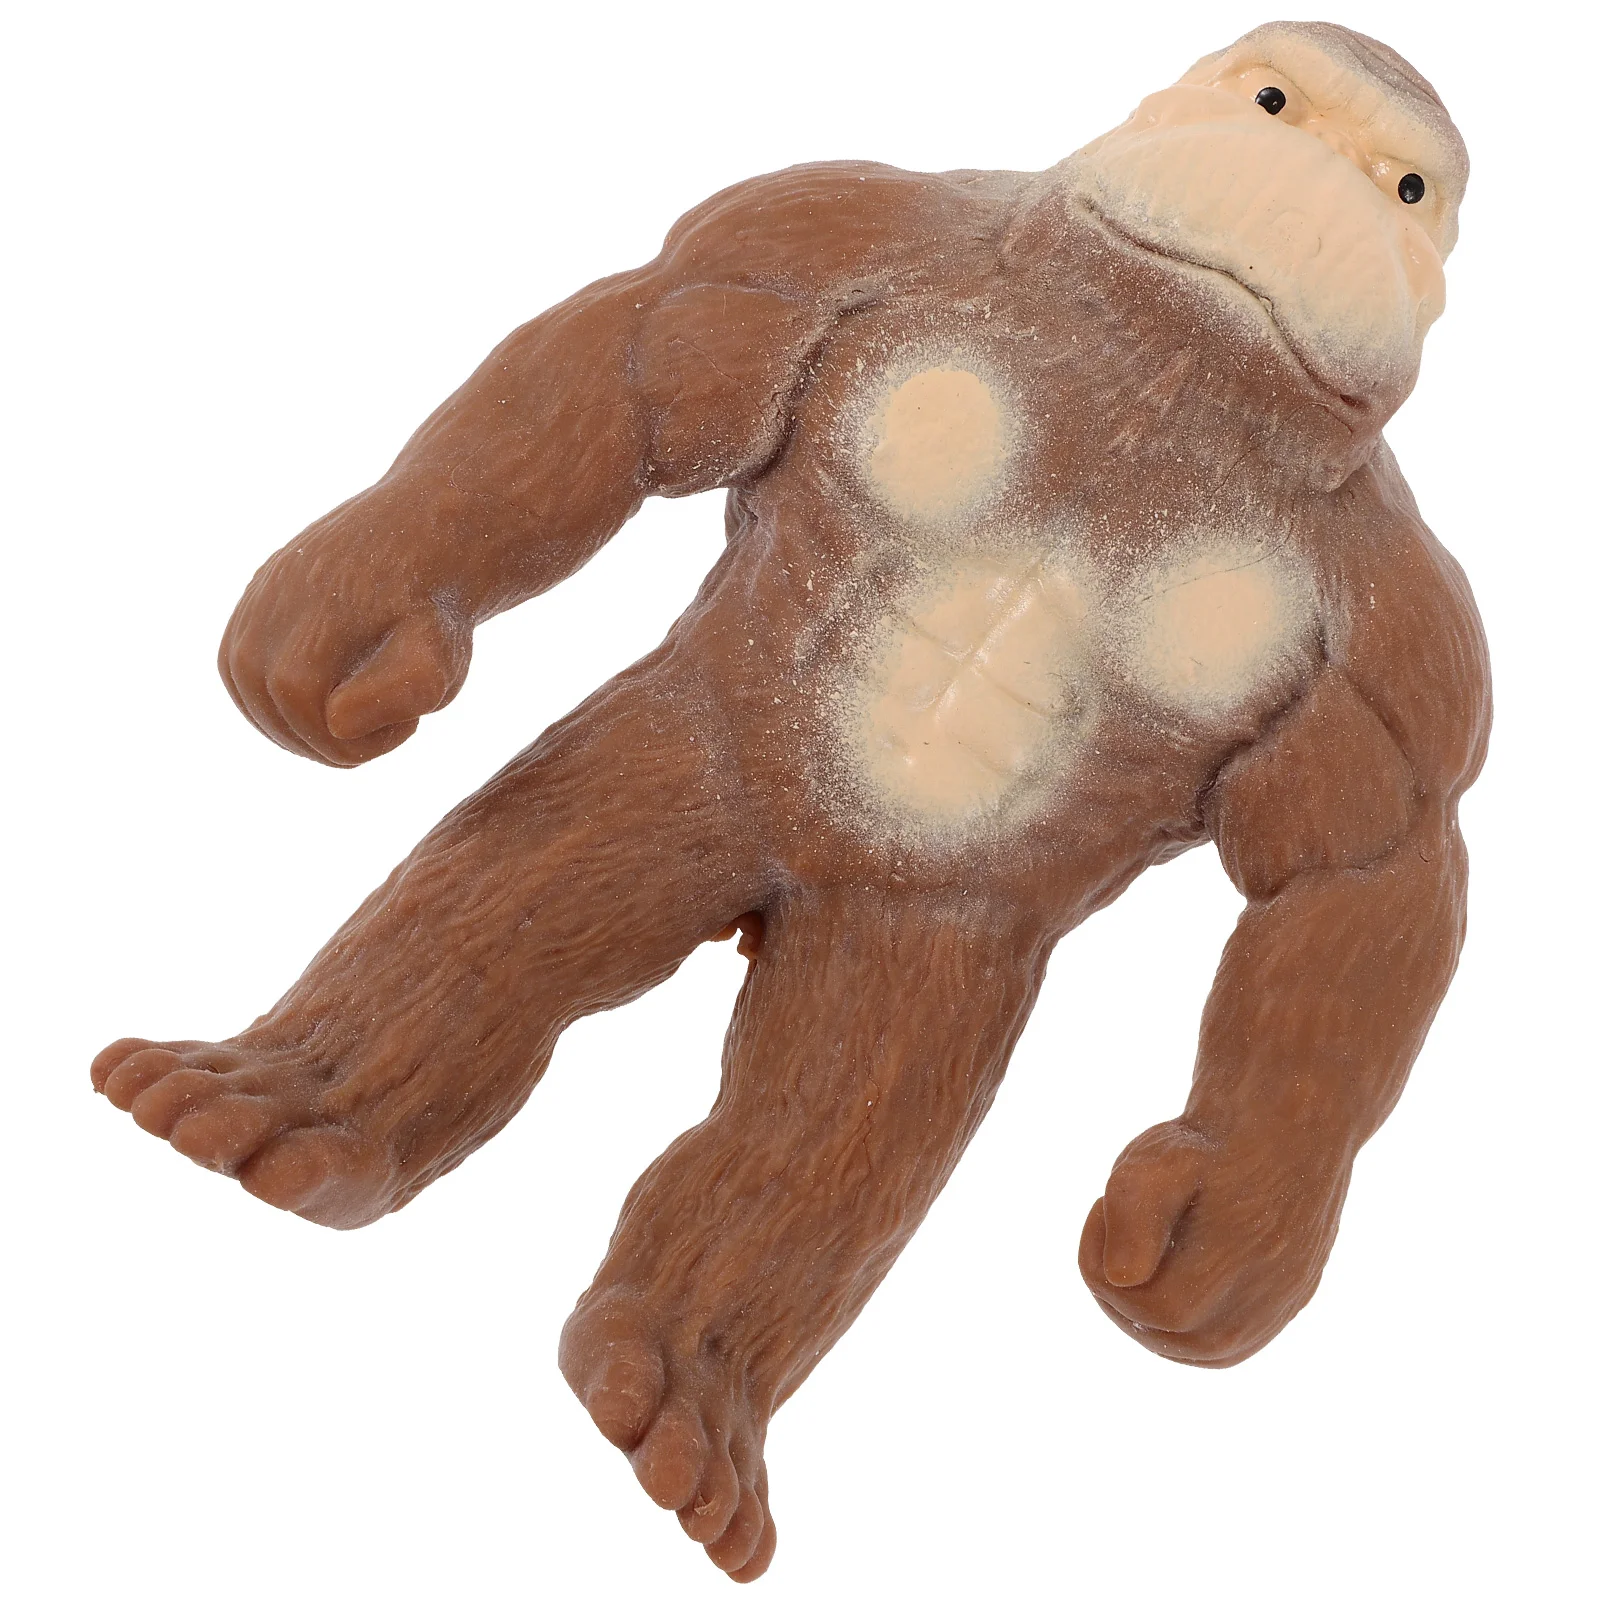 

Stretchy Animal For Party Favor Plaything Decompression Toys Gorilla Squeeze Tricky Props Bulk